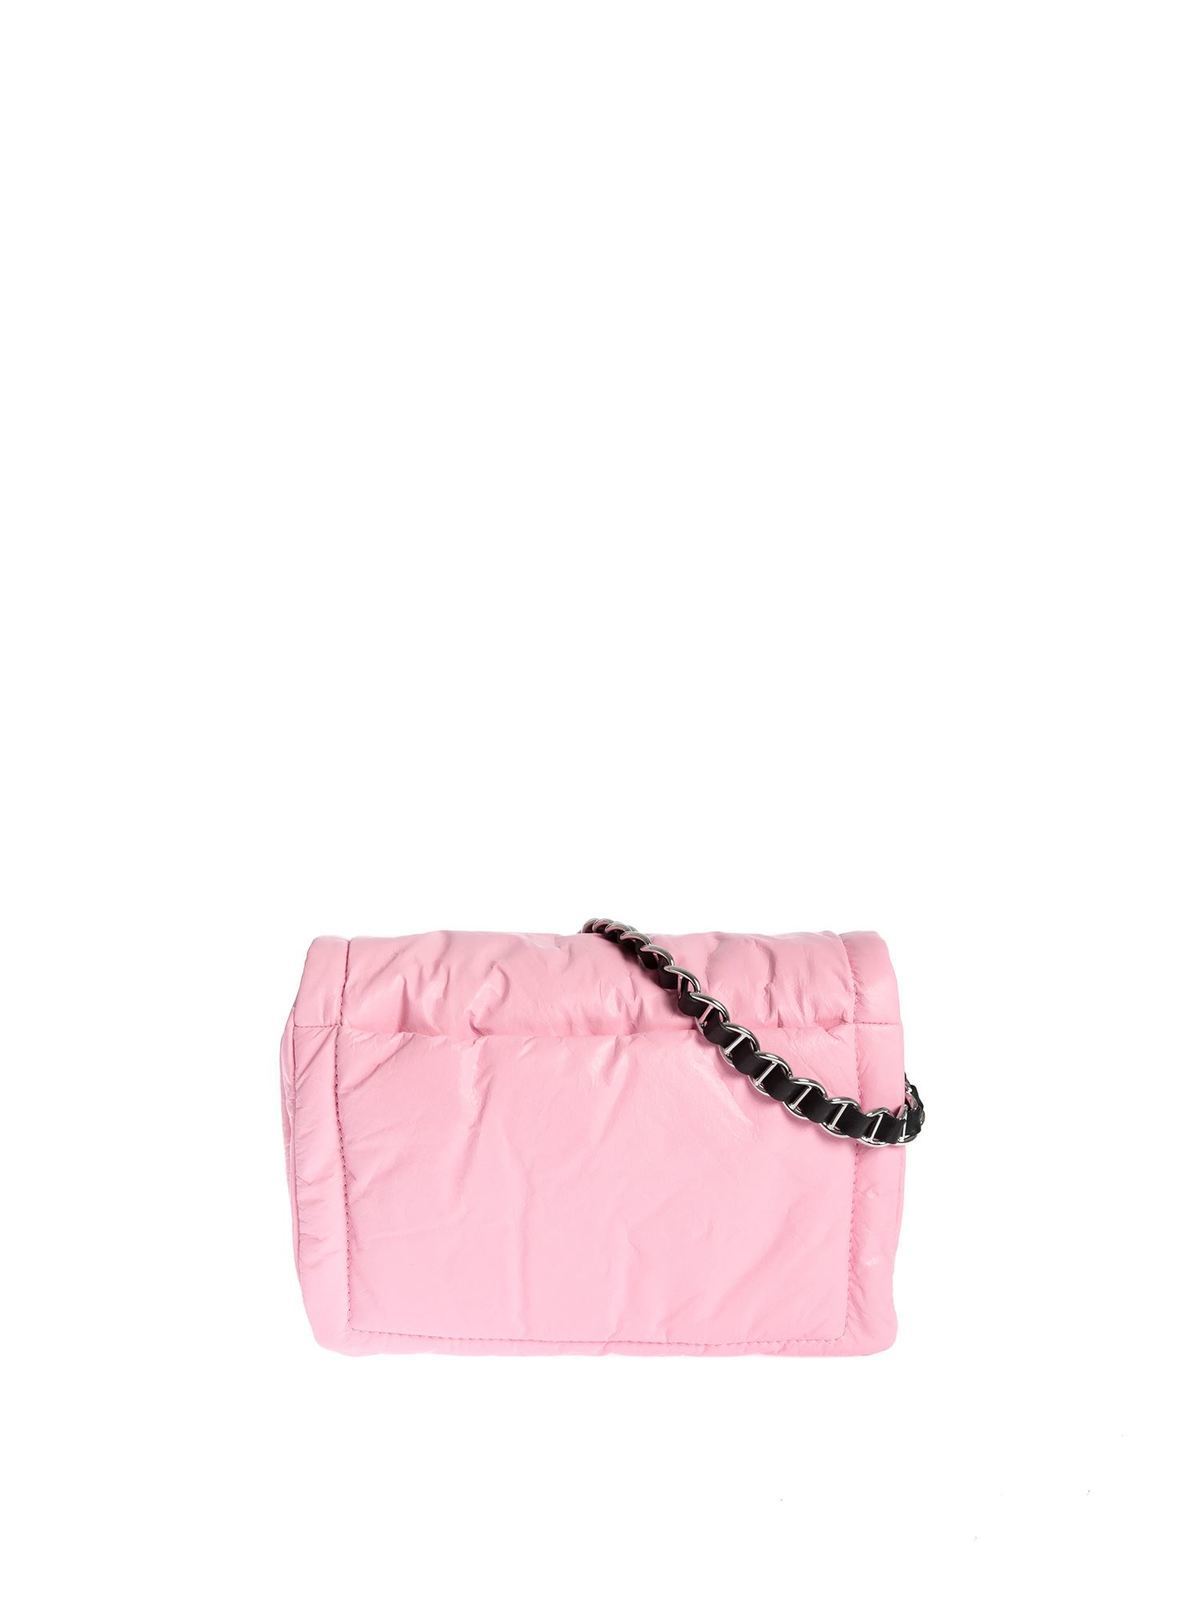 Cross body bags Marc Jacobs - The Pillow bag in Powder Pink